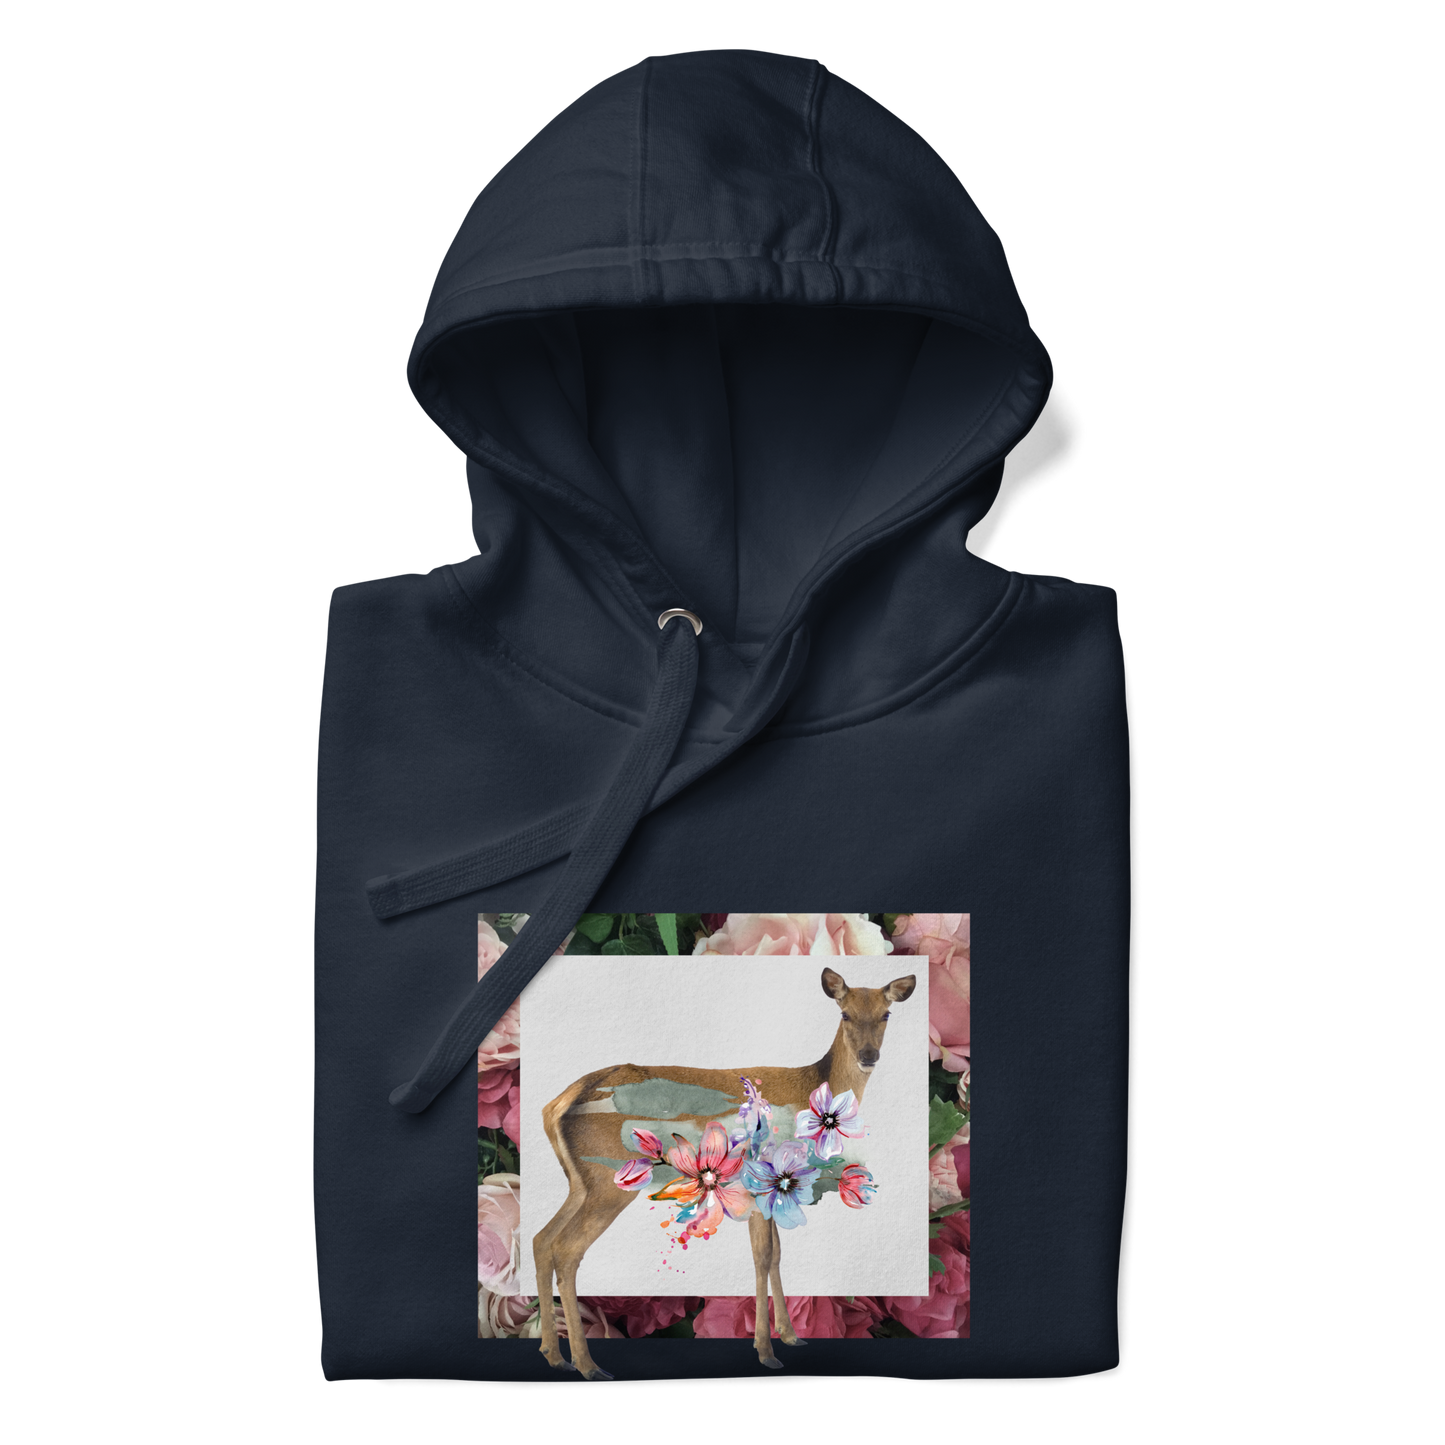 Front details of a Navy Blazer Premium Floral Deer Hoodie featuring an enchanting Floral Deer graphic on the chest - Cute Graphic Deer Hoodies - Boozy Fox